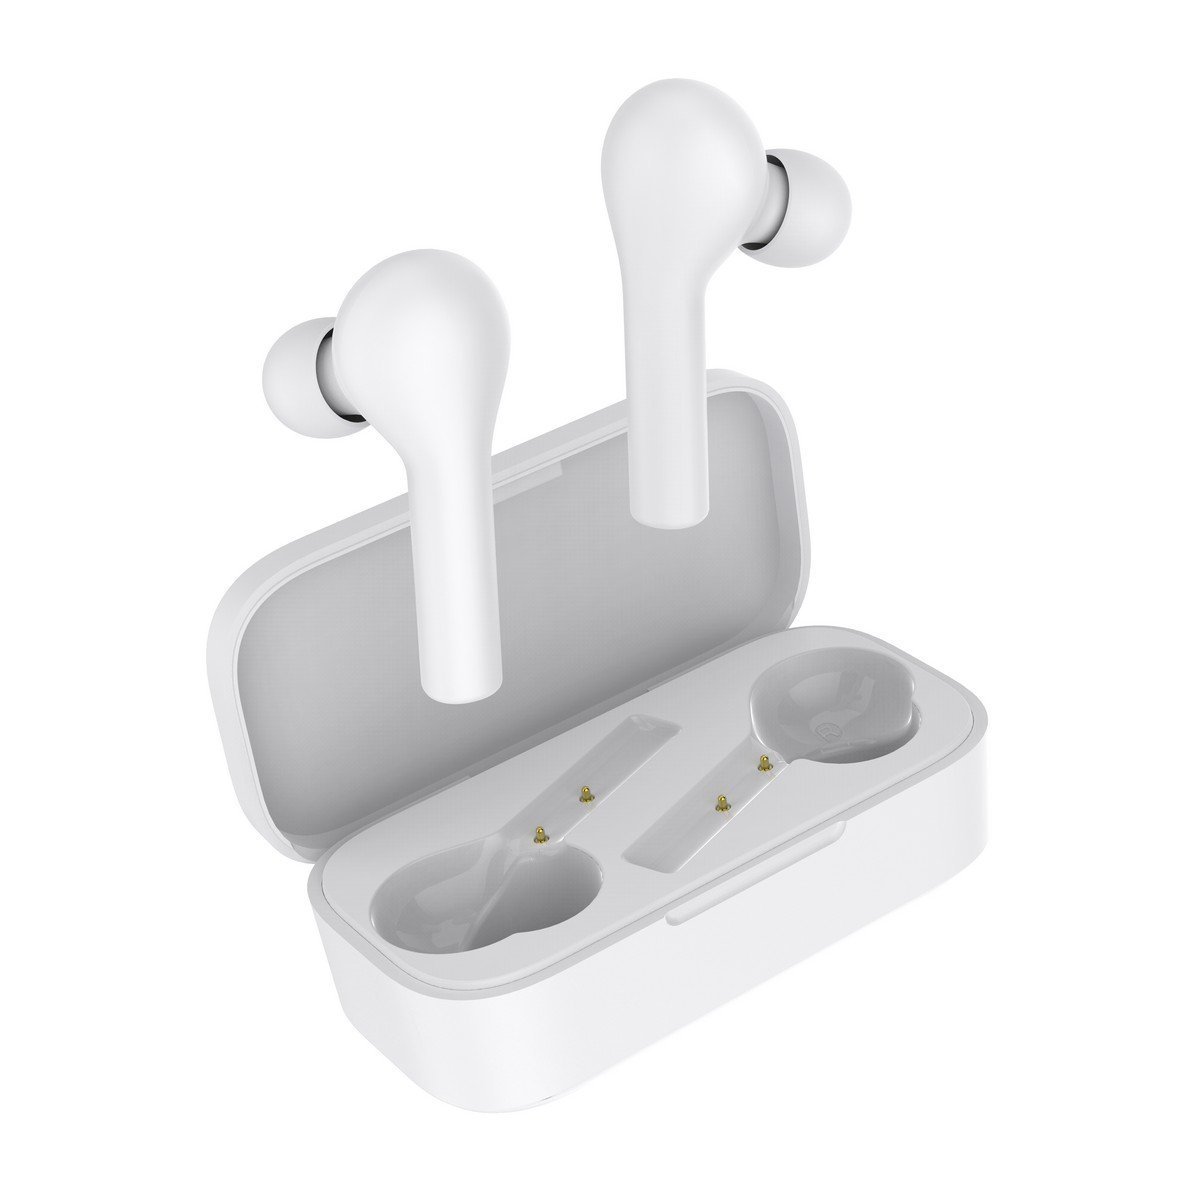 Casti in-Ear QCY T5 TWS, Alb, Wireless, Bluetooth 5.0, Control touch, Baterie 380 mAh imagine